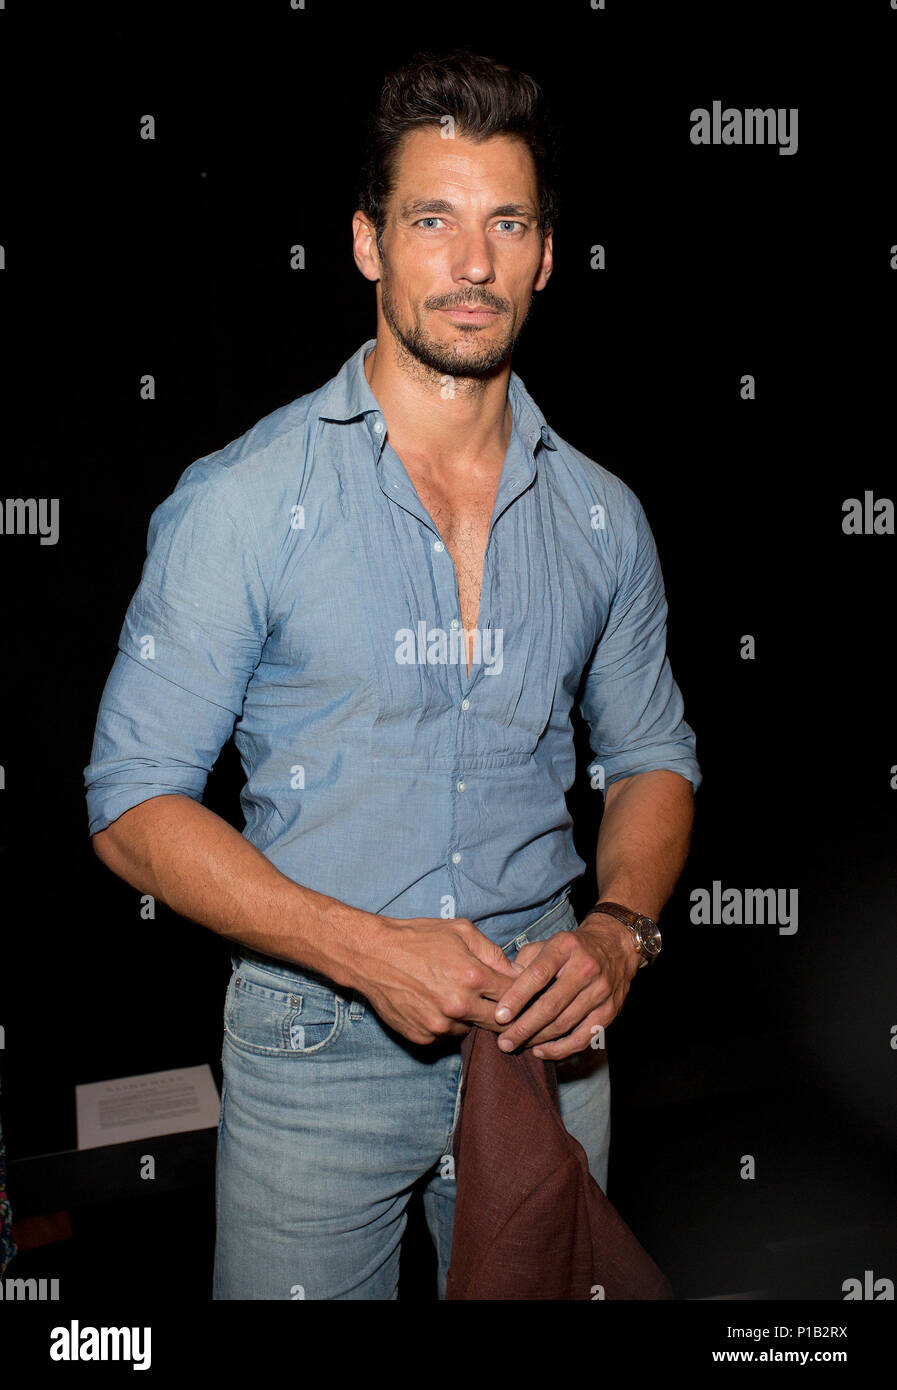 David Gandy on the front row during the Blindness London Fashion Week Men's SS19 show at the BFC Showspace, London Stock Photo